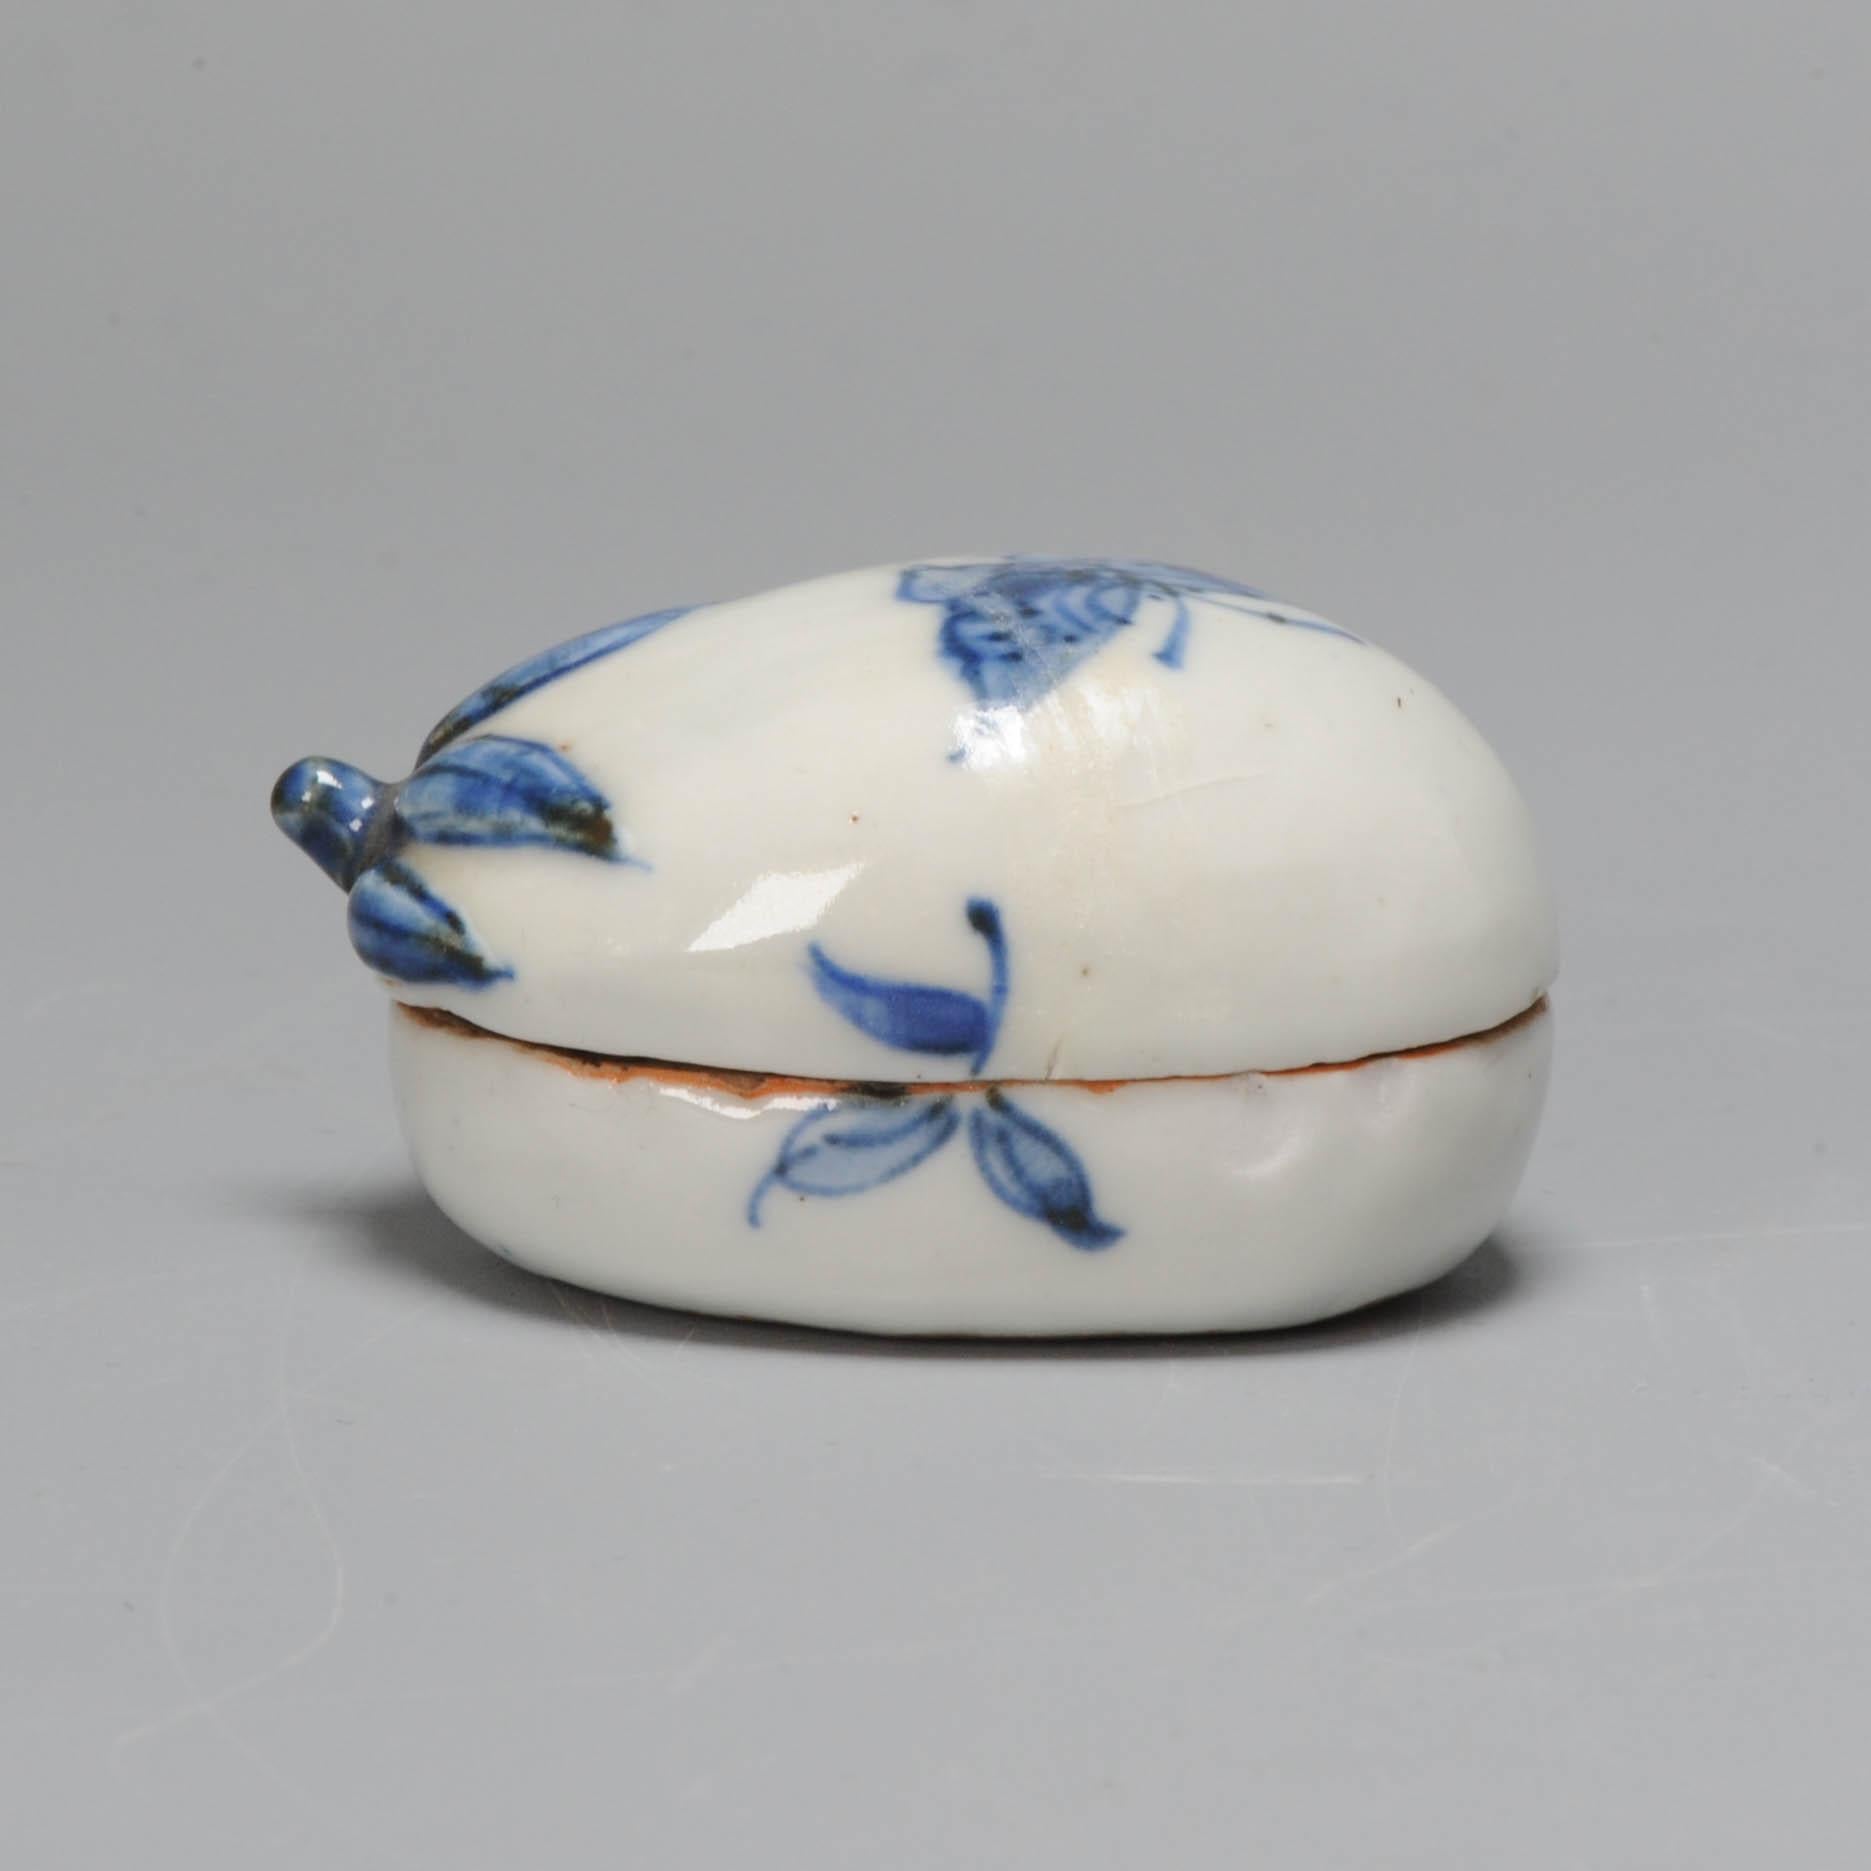 Rare Ca 1600 Chinese Porcelain Ming Period Kosometsuke Incense Box Fruit For Sale 4